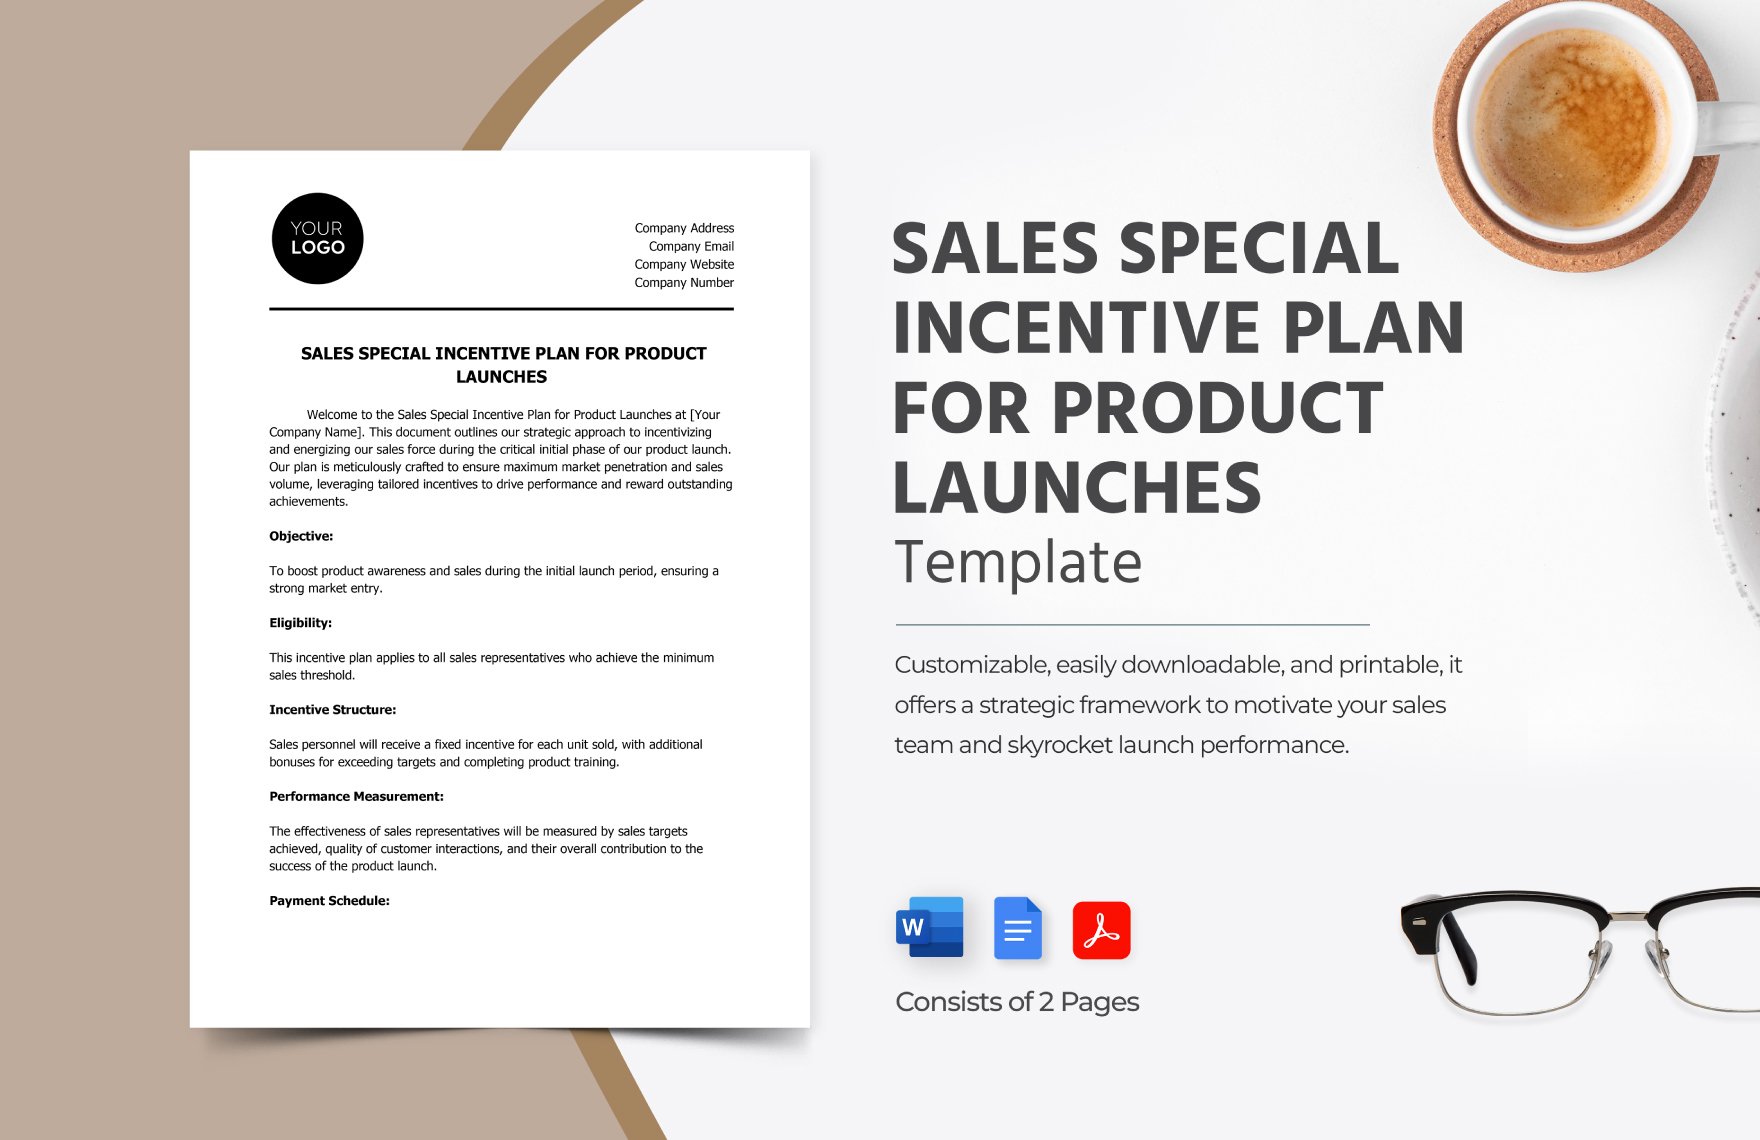 Sales Special Incentive Plan for Product Launches Template